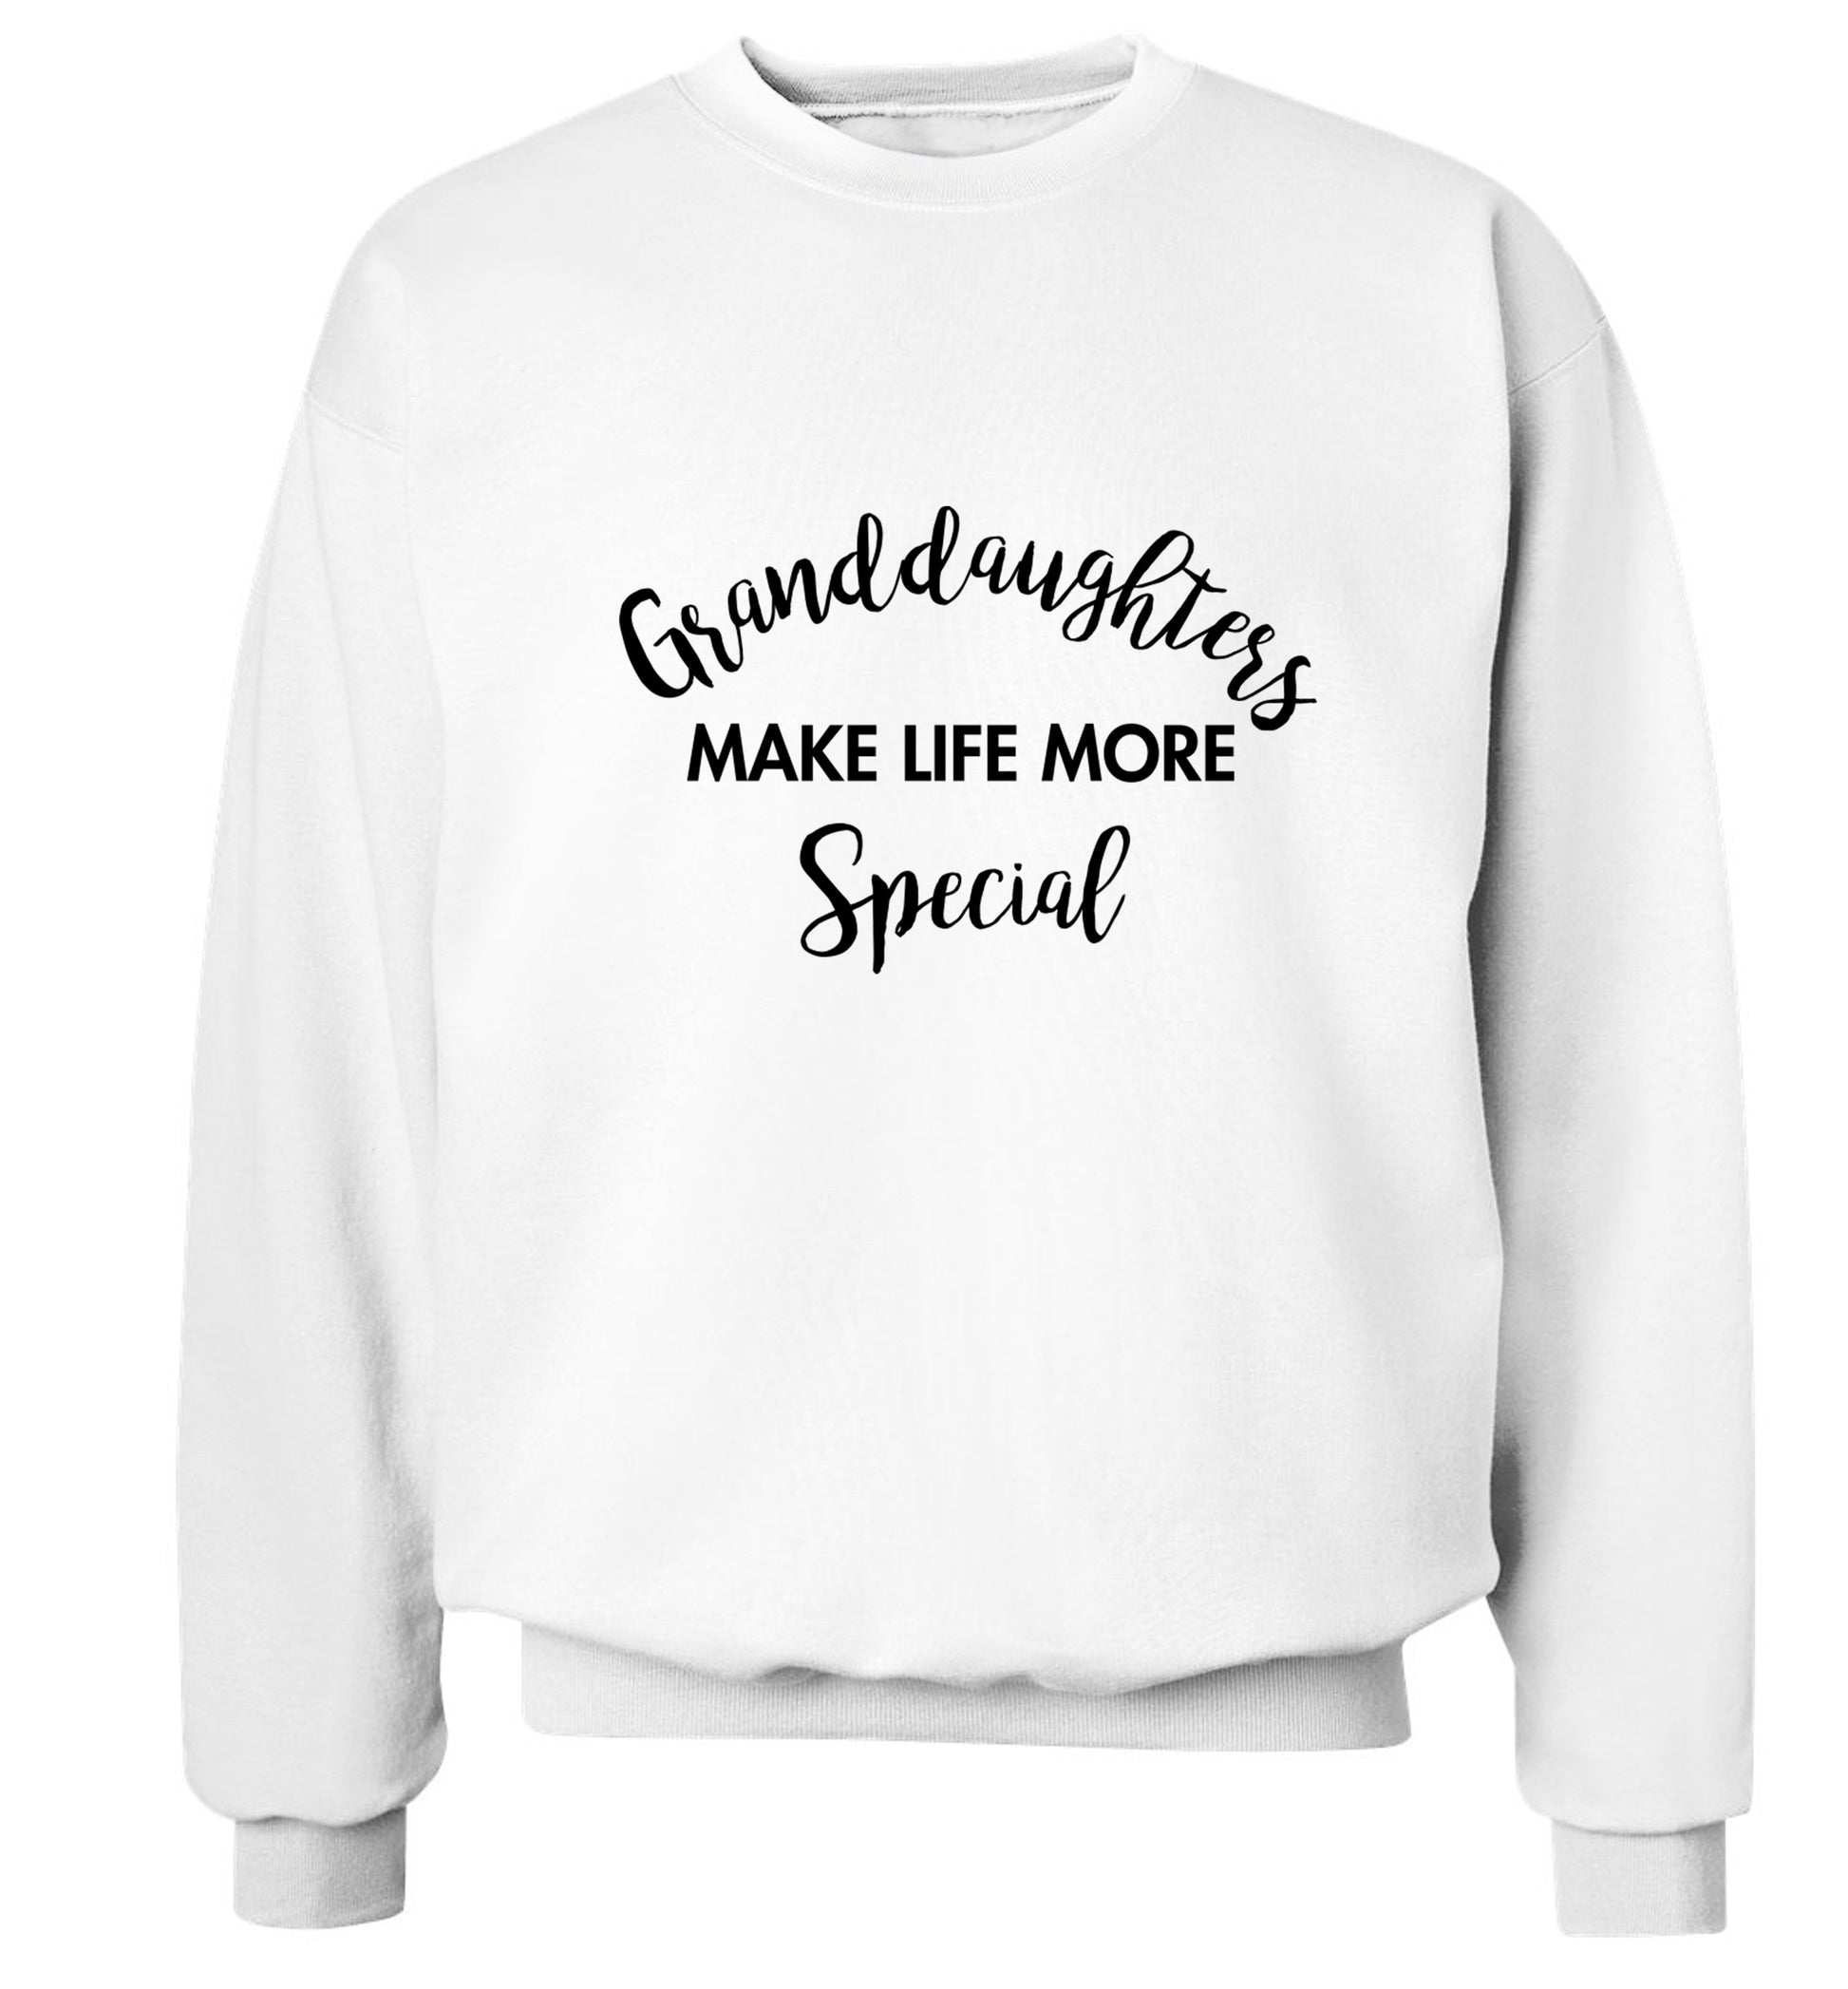 Granddaughters make life more special Adult's unisex white Sweater 2XL